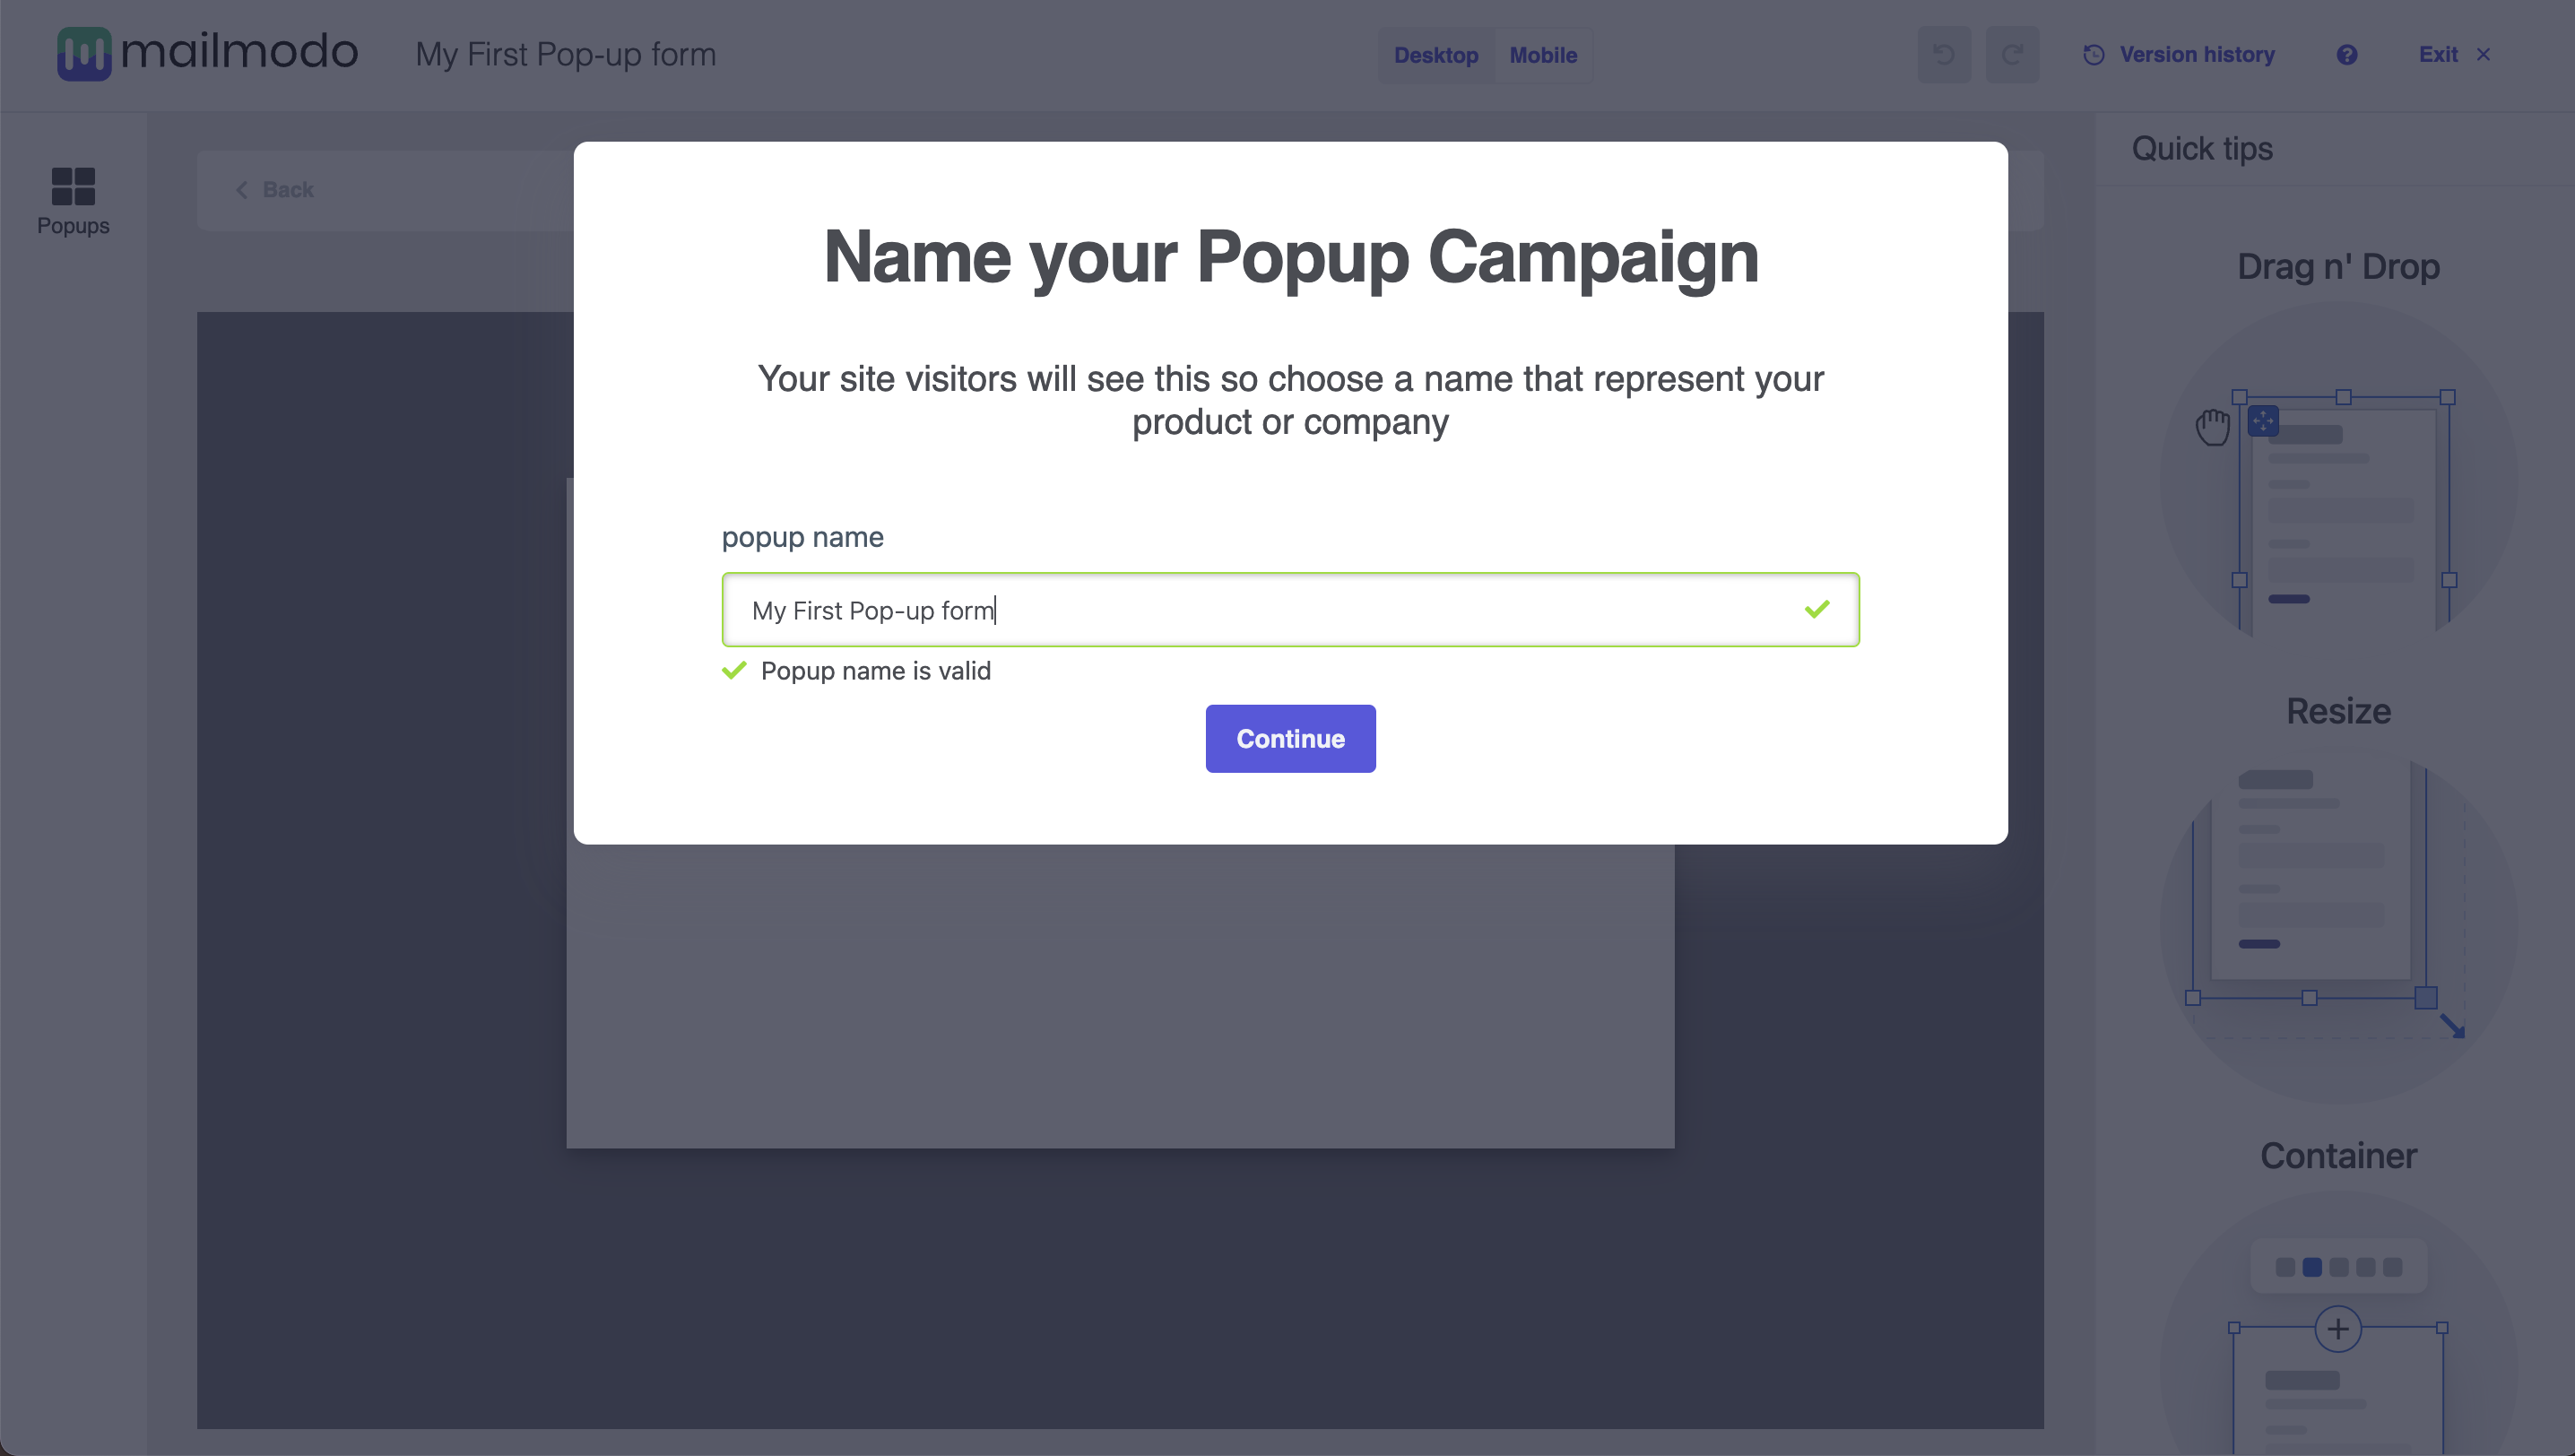 Getting started with Pop-up forms